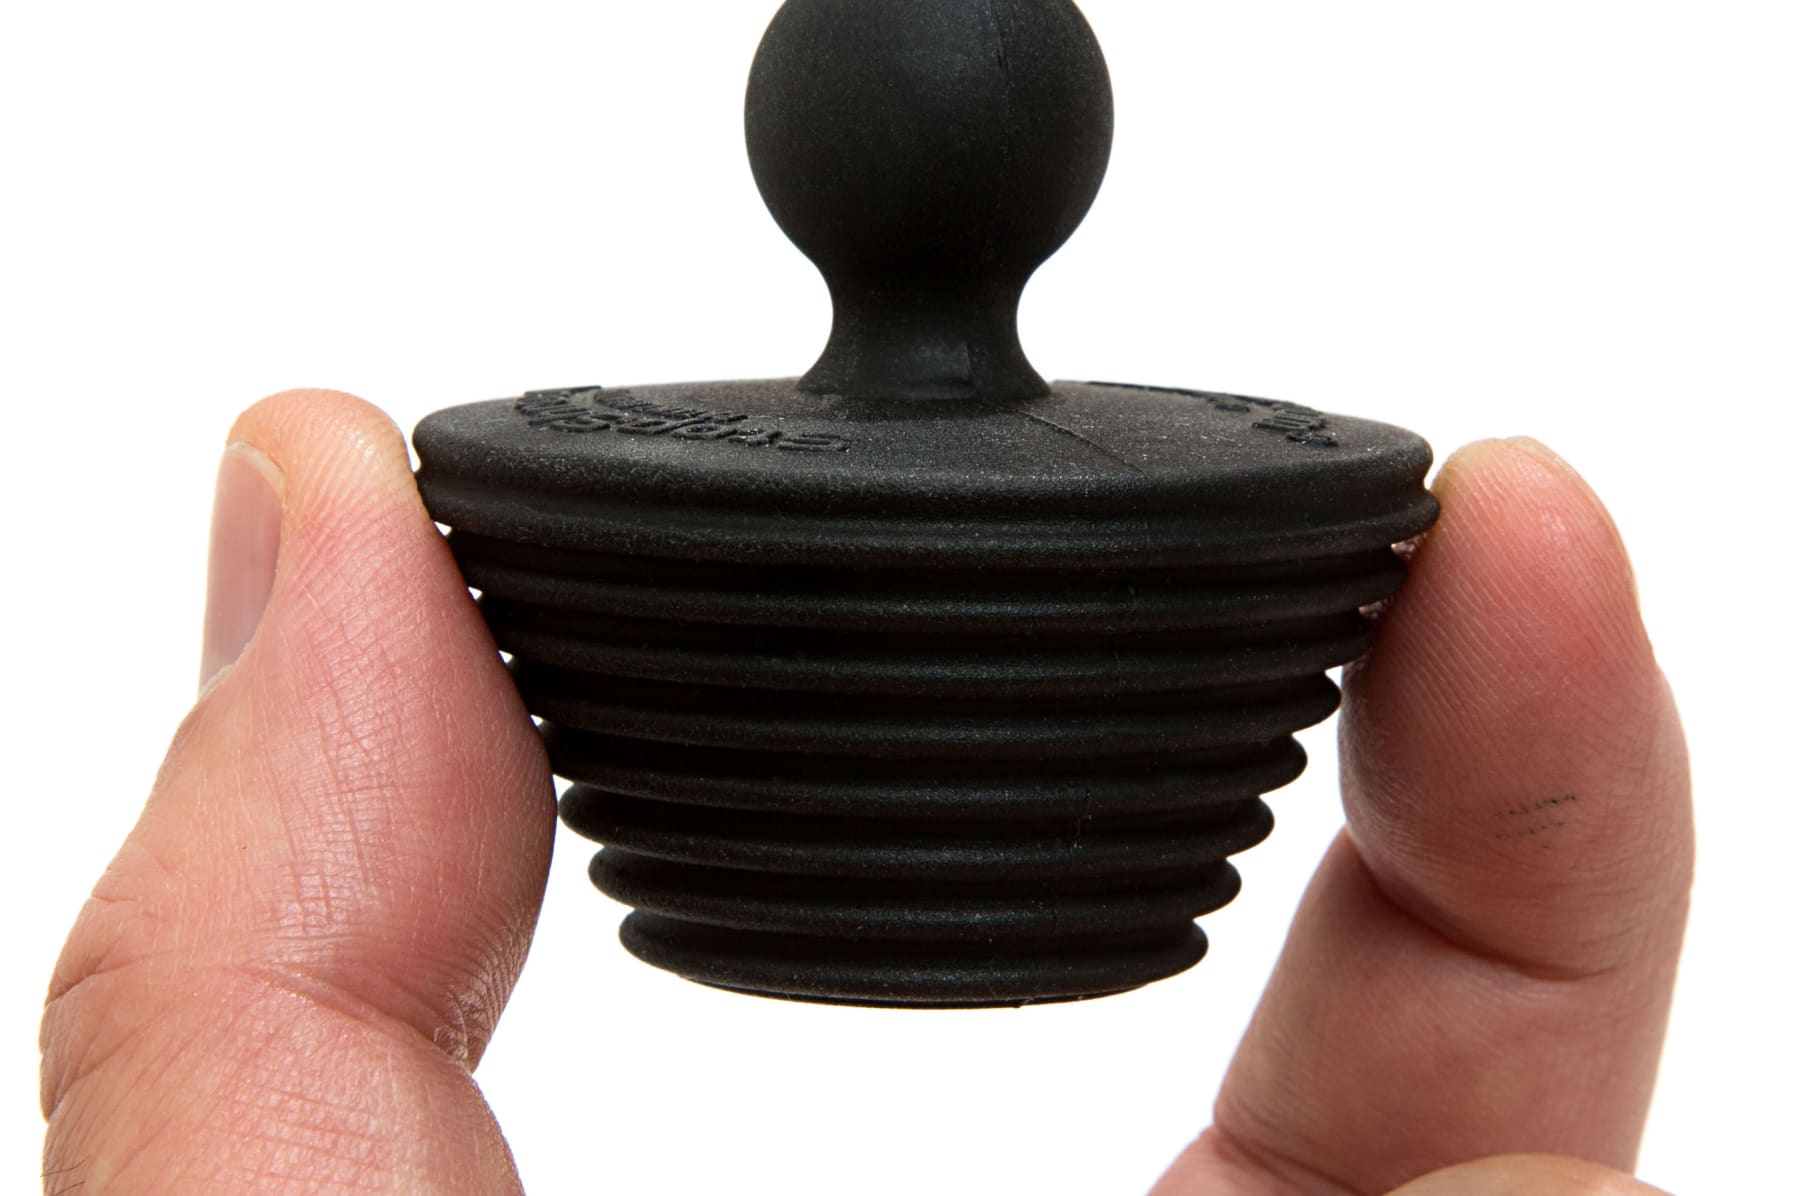 ShowerShroom Stealth: Catches Hair Out of Sight For No Clogs by Solyman  Najimi — Kickstarter